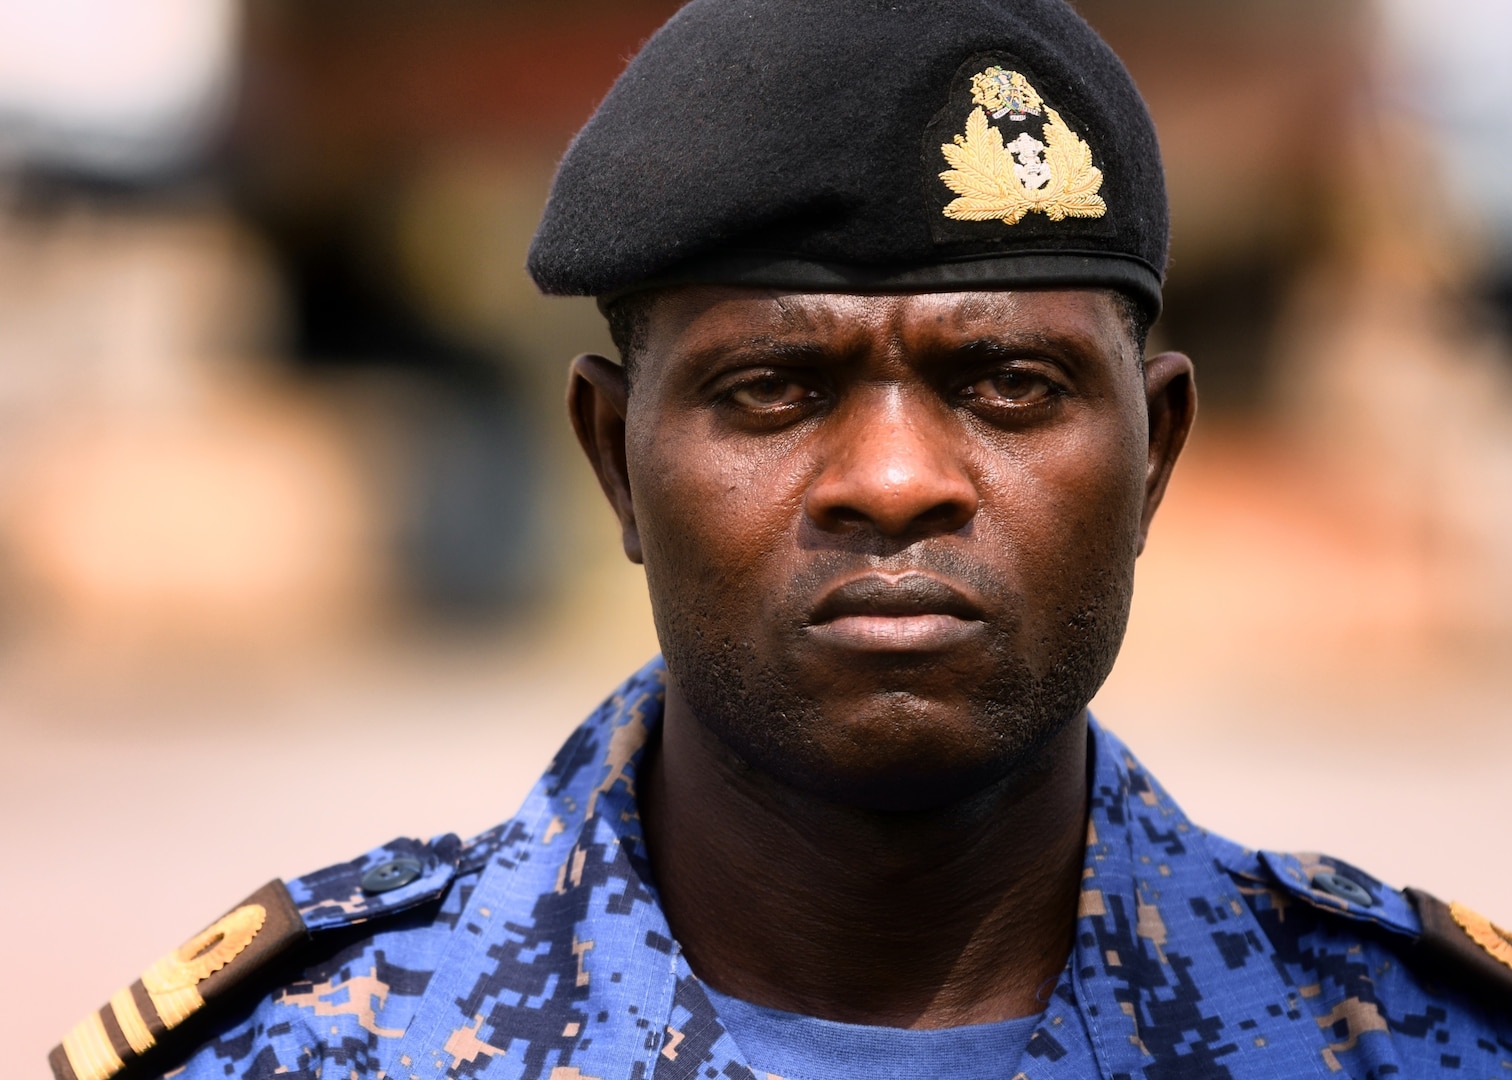 The Gambian Navy Lt. Cmdr. Farra Jobe, a liaison officer, poses for a photo in the Naval Dockyard in Lagos, Nigeria, Jan. 23, 2023. Obangame Express 2023, conducted by U.S. Naval Forces Africa, is a maritime exercise designed to improve cooperation, and increase maritime safety and security among participating nations in the Gulf of Guinea and Southern Atlantic Ocean. U.S. Sixth Fleet, headquartered in Naples, Italy, conducts the full spectrum of joint and naval operations, often in concert with allied and interagency partners, in order to advance U.S. national interests and security and stability in Europe and Africa. (U.S. Navy photo by Mass Communication Specialist 1st class Cameron C. Edy)